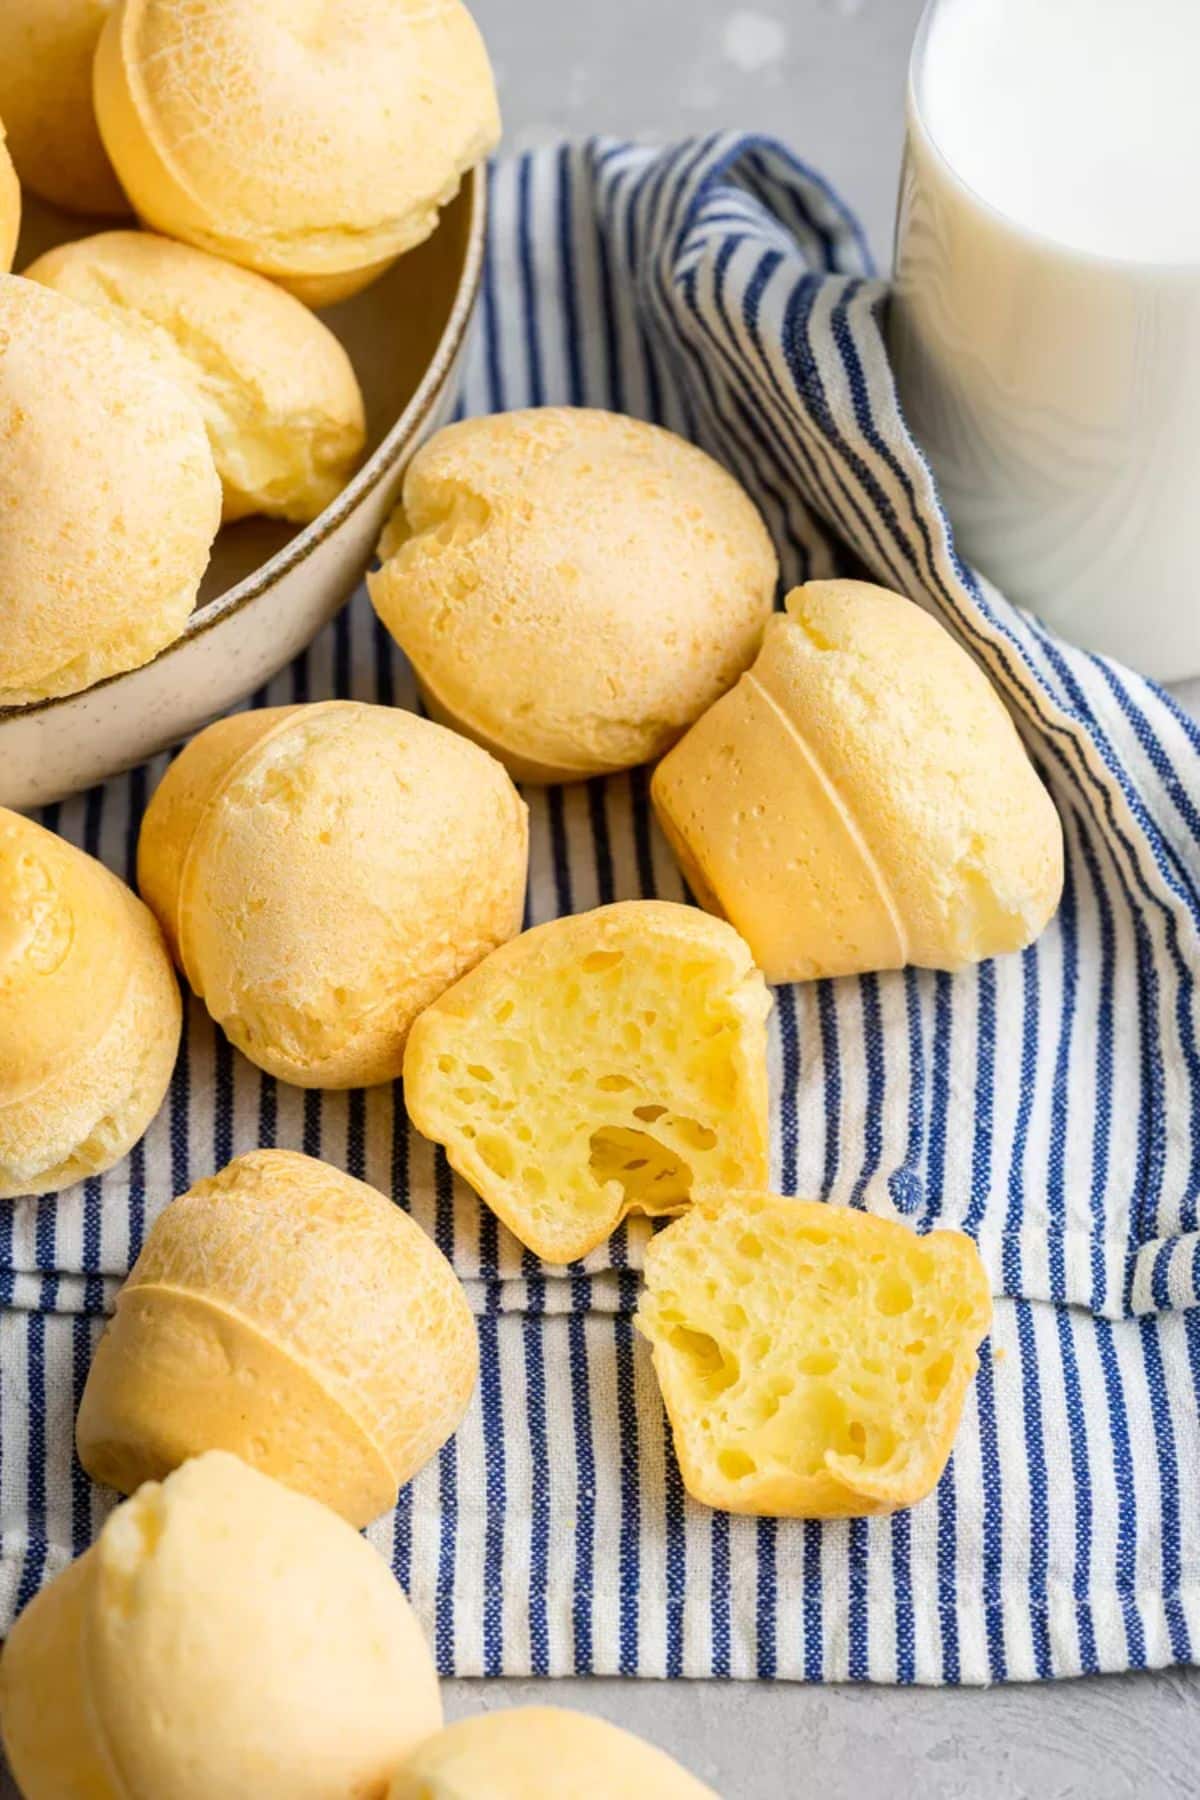 Tasty Easy Brazilian Cheese Breads scattered on a table.